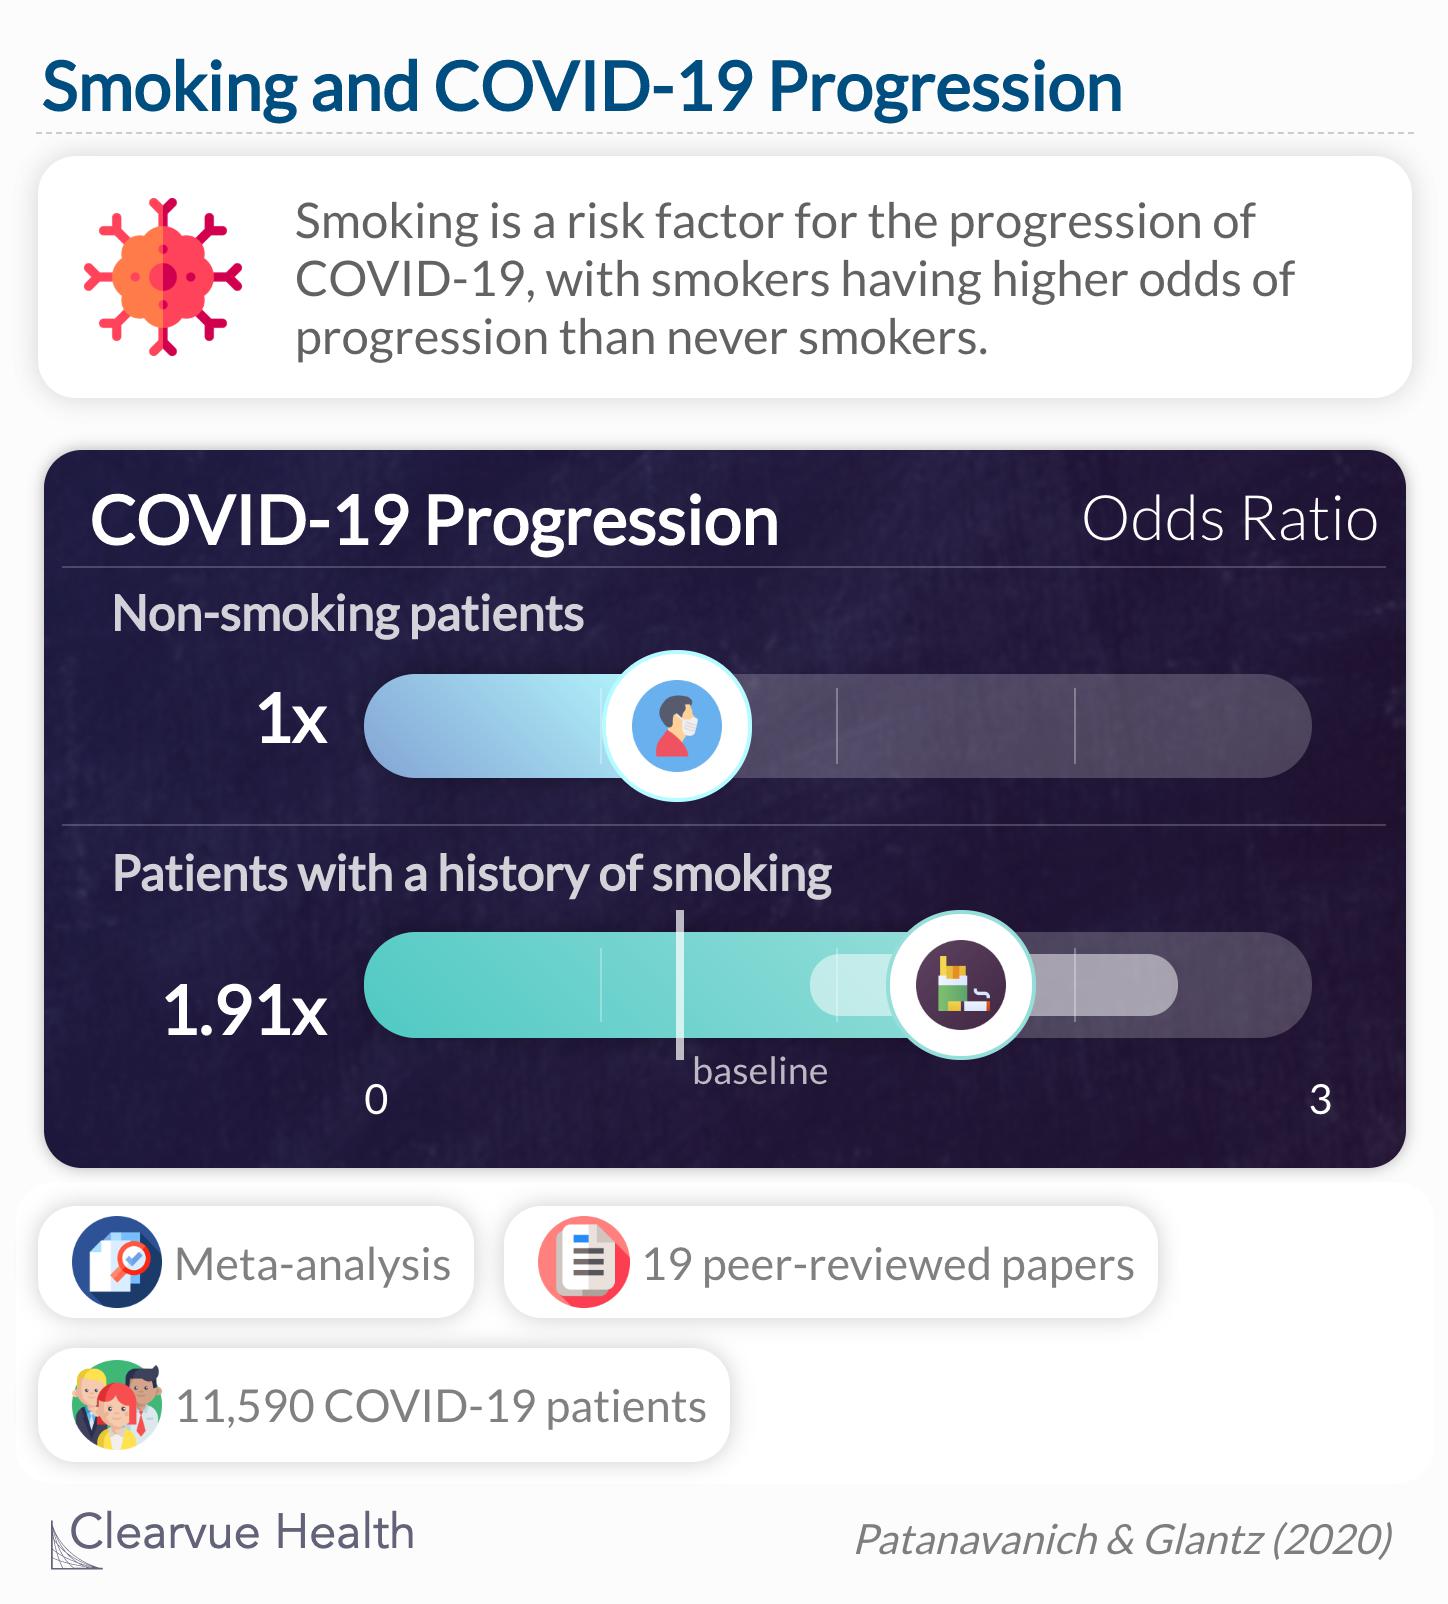 Smoking is a risk factor for progression of COVID-19, with smokers having higher odds of COVID-19 progression than never smokers.